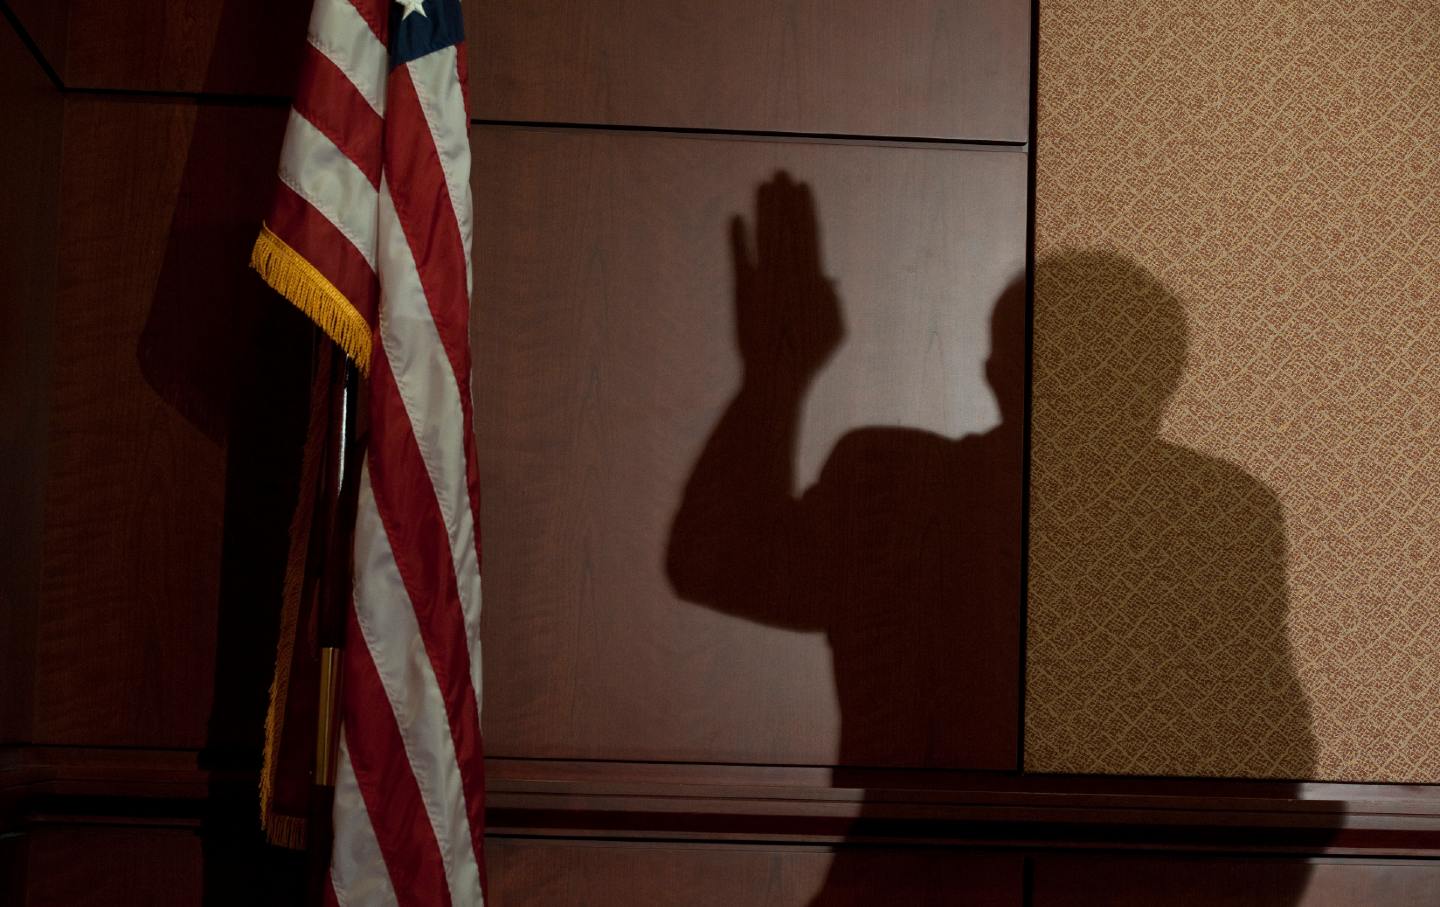 The shadow of Bernie Sanders, with his hand raised, next to an American flag